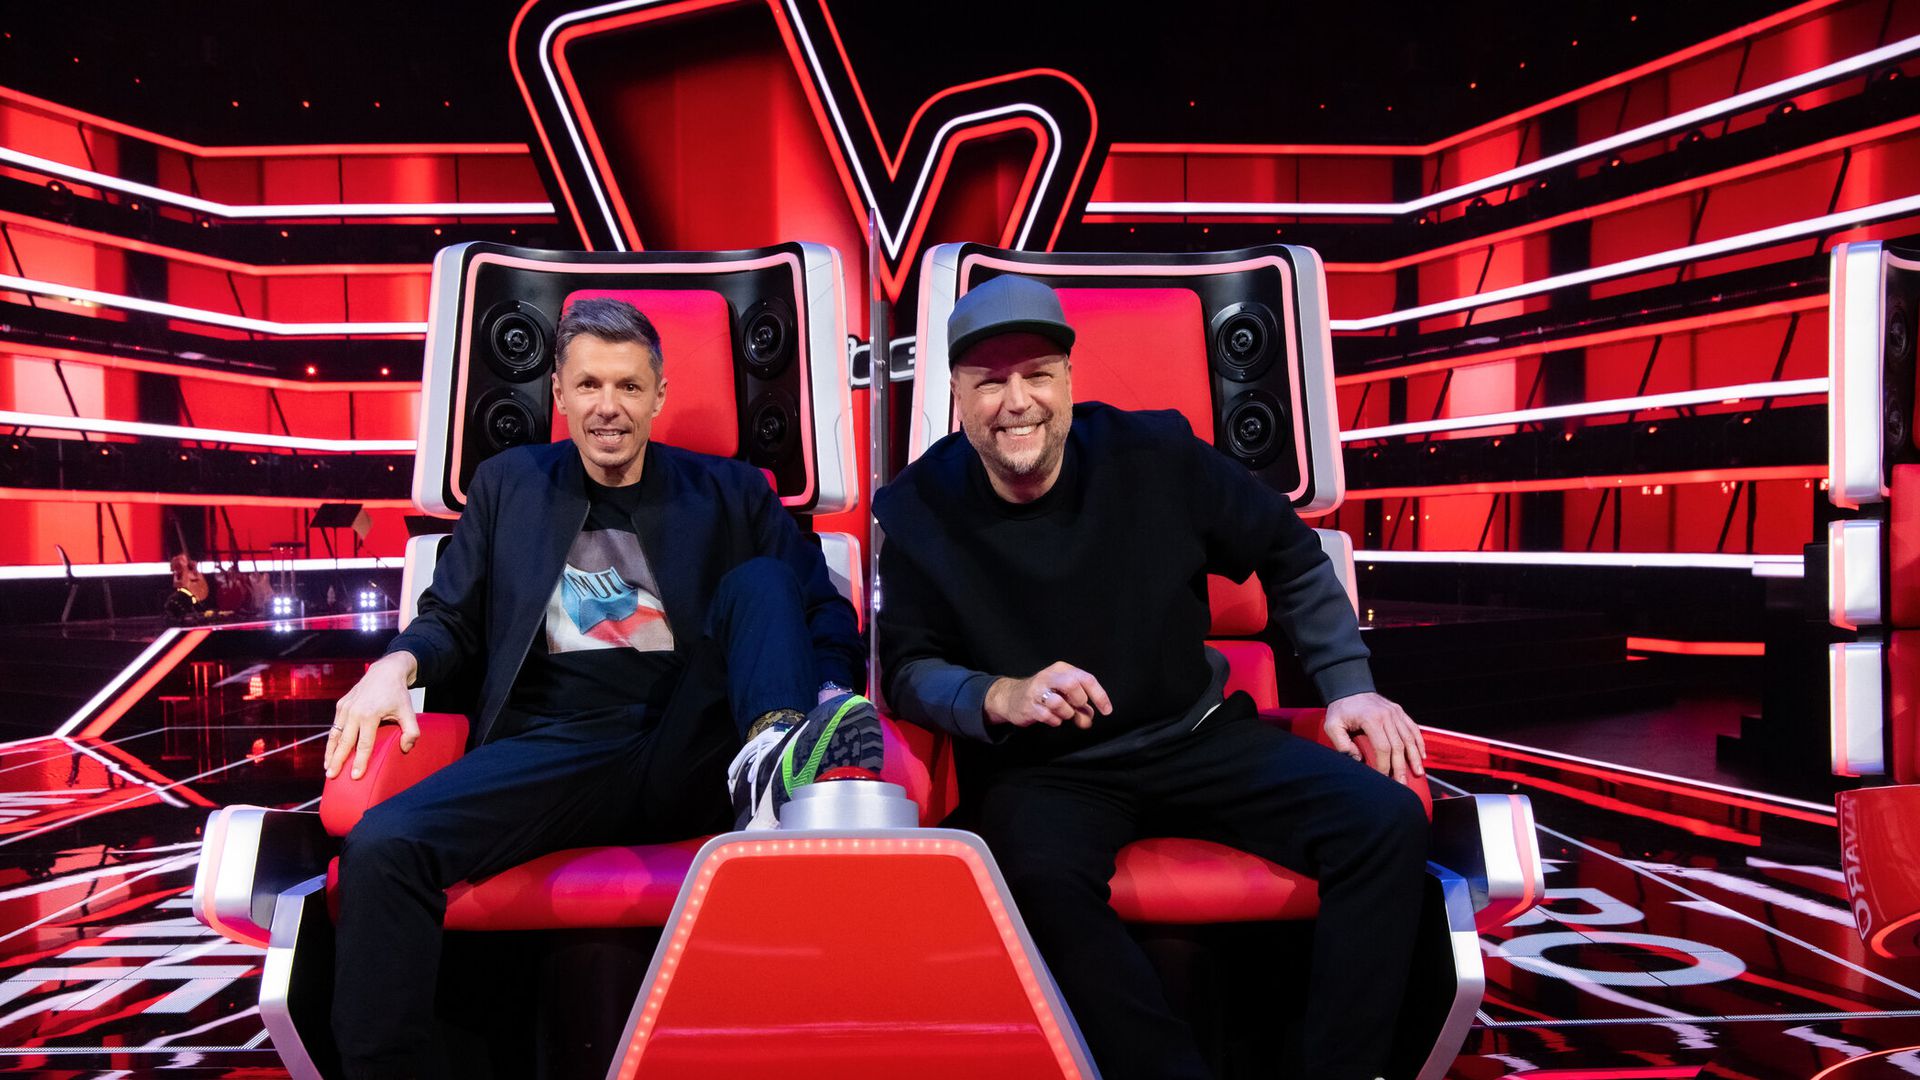 The Voice Kids Wallpapers